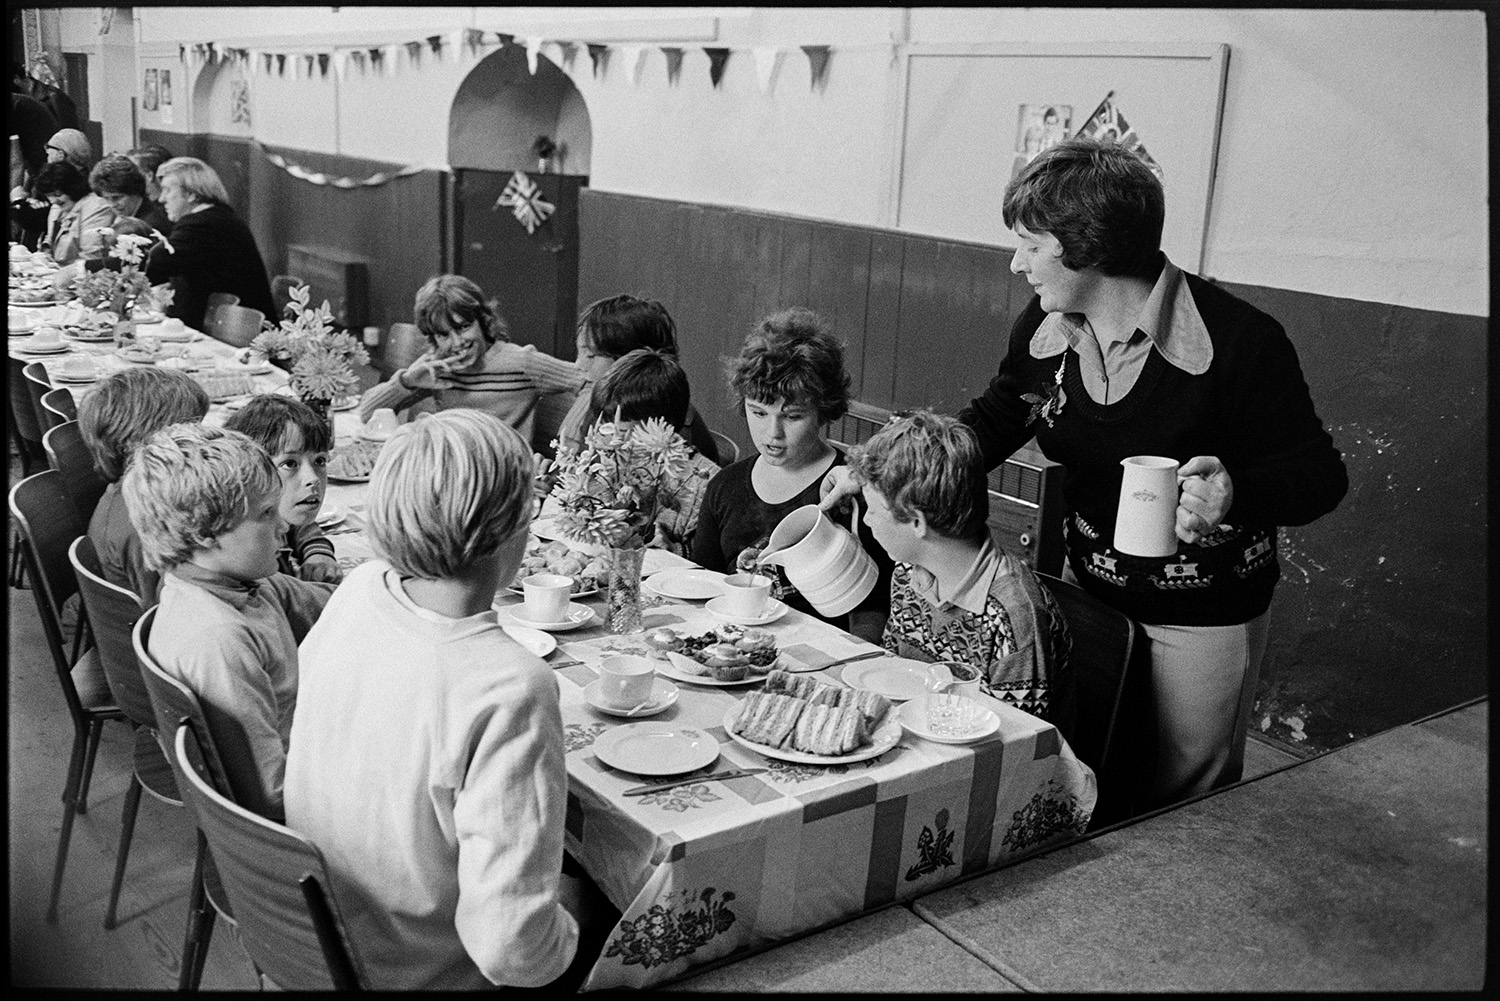 Village sports day, speeches, eating tea in hall, races, people chatting. 
[Children having a tea of sandwiches and cakes in Roborough Village Hall after Roborough Sports Day. A woman is pouring them drinks. The hall is decorated with bunting and flags.]